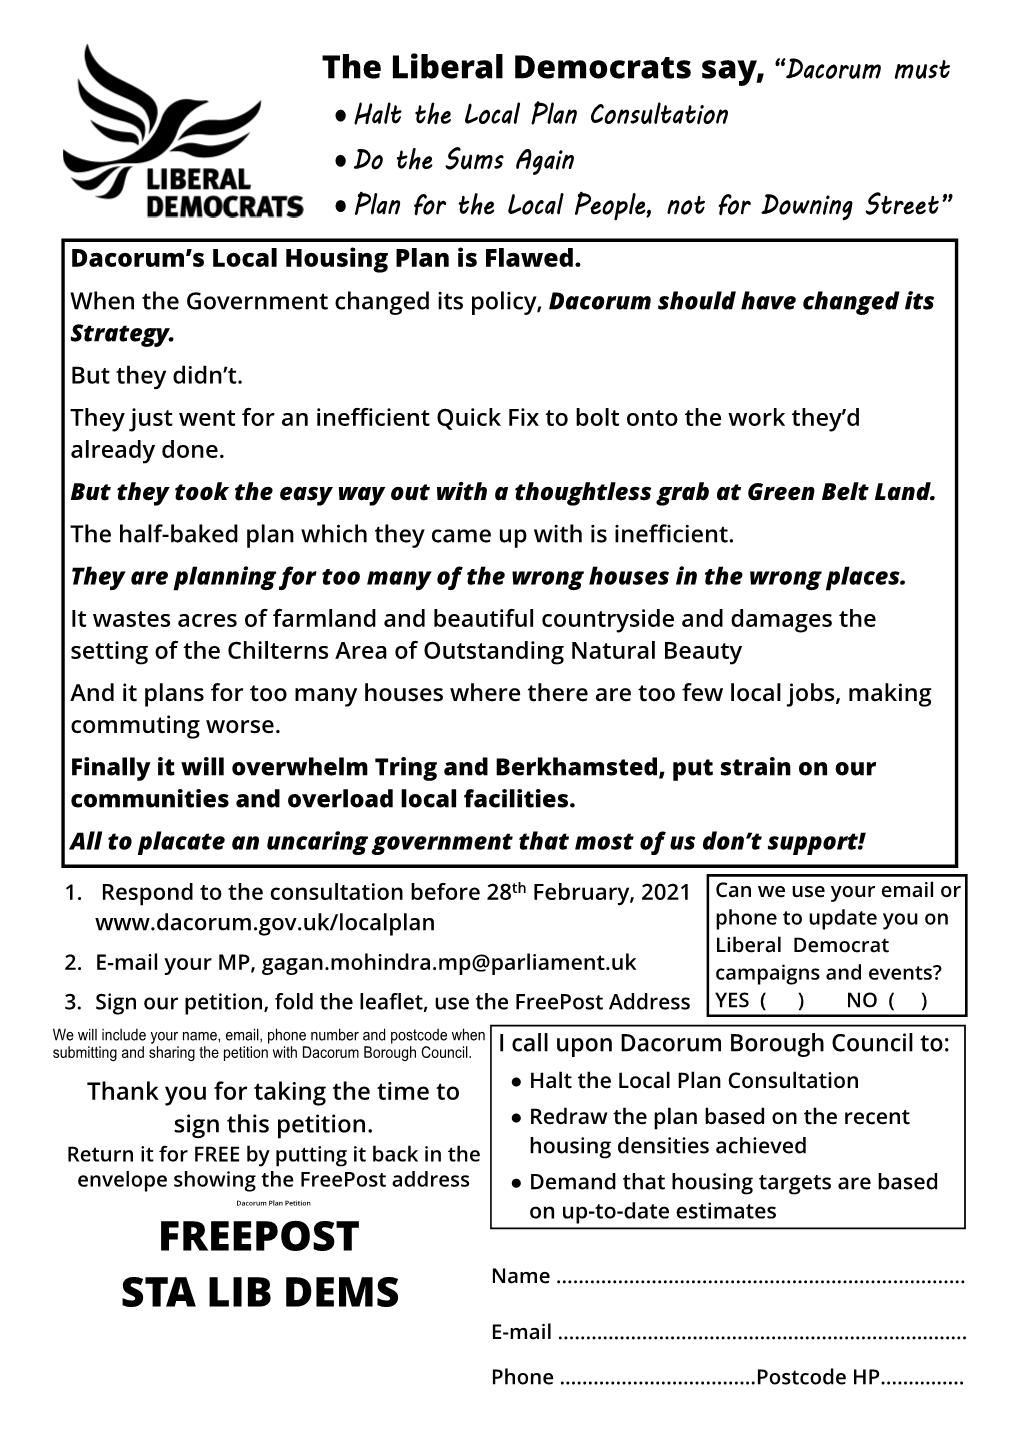 Dacorum Local Plan Petition …Have Your Say on the Housing Plans Where You LIVE Dear Resident